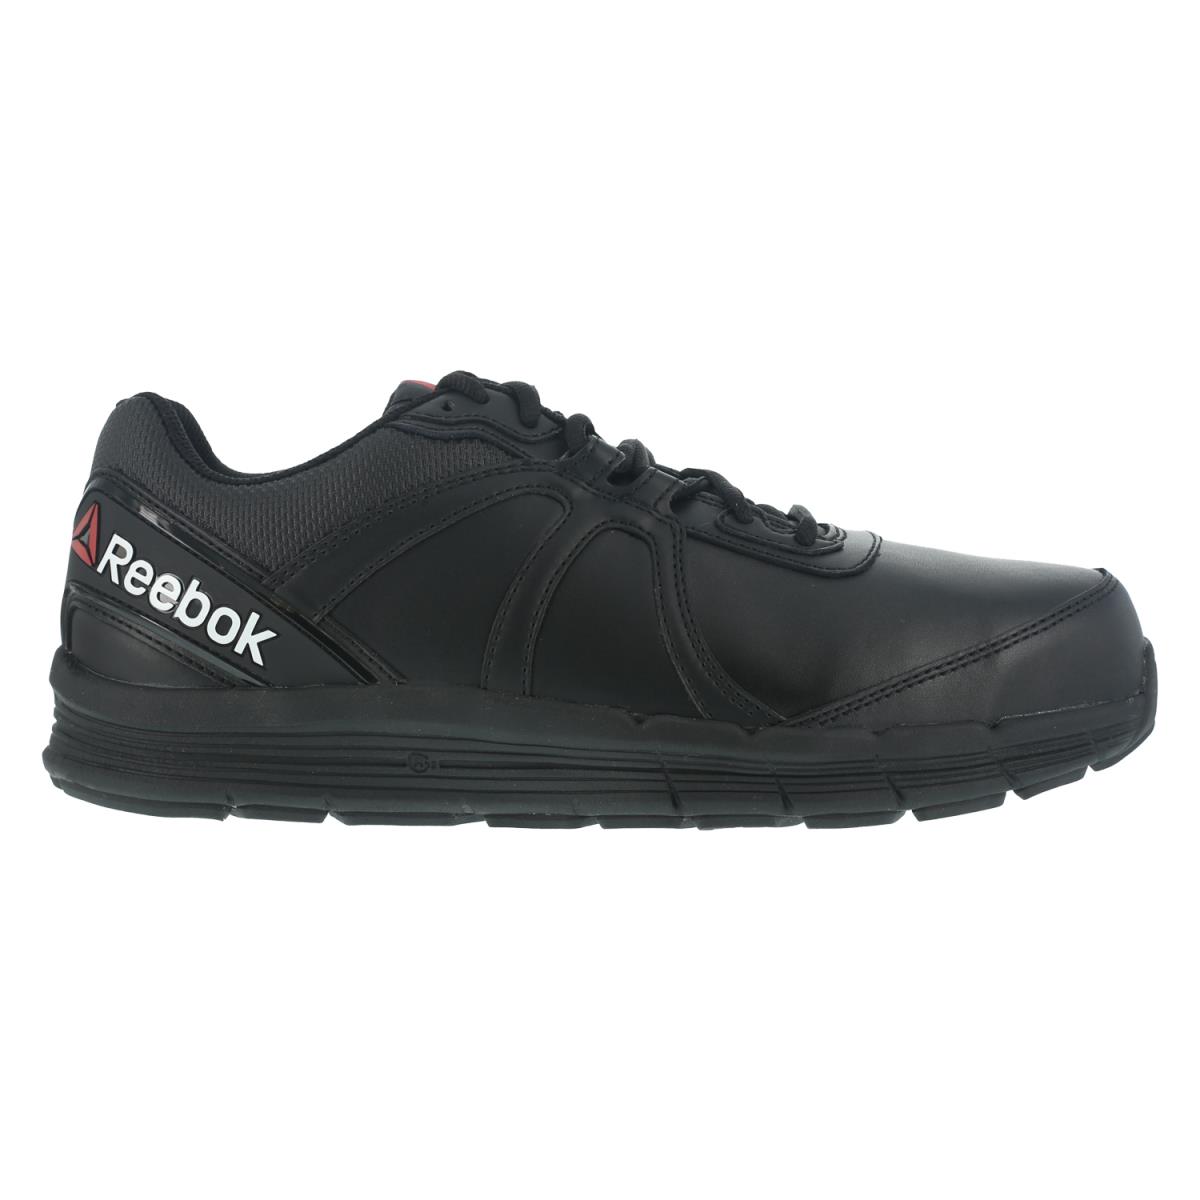 Reebok Womens Black Leather Work Shoes ST Oxford Guide M